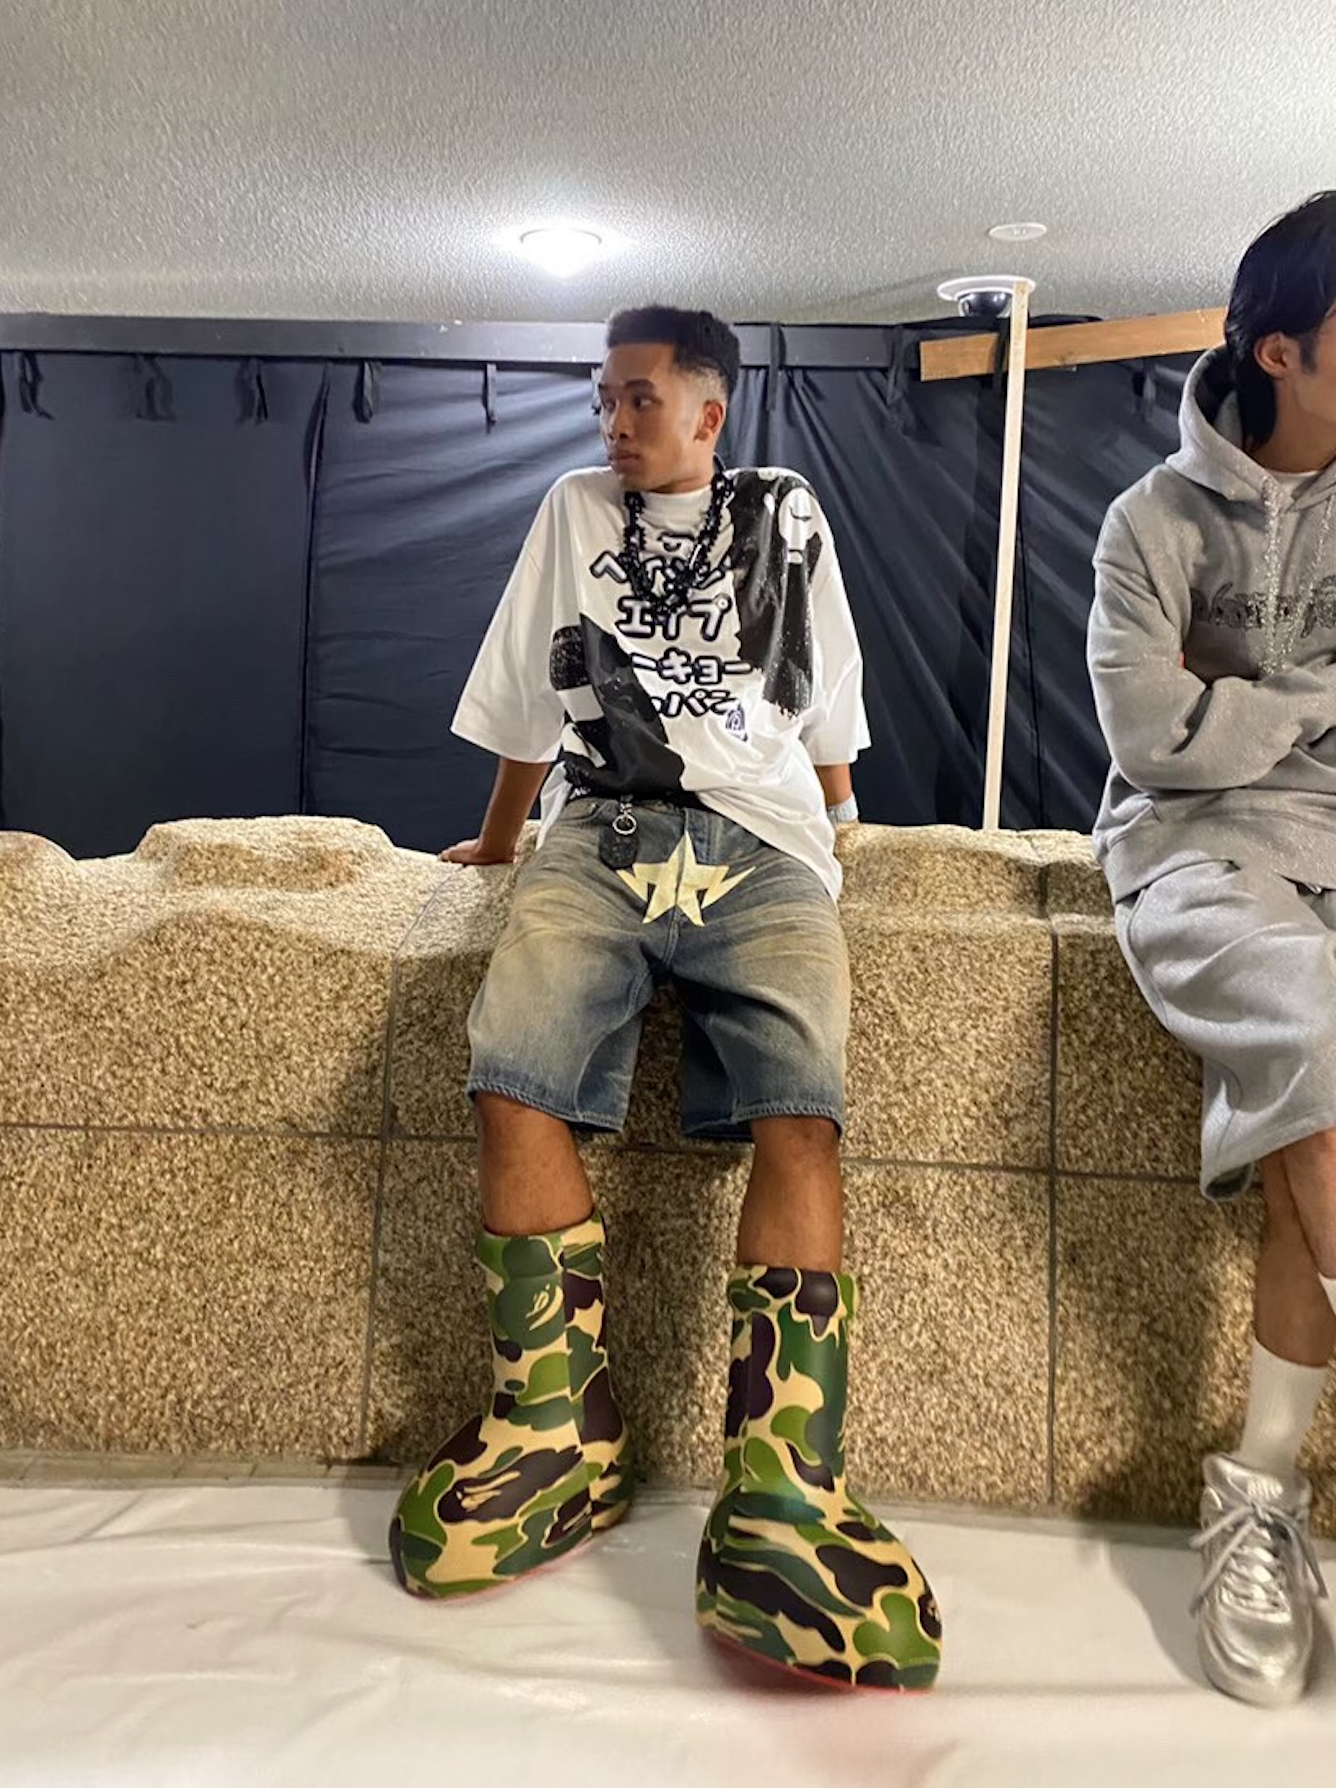 BAPE x MSCHF Boots Are Real But They Ain't a Collab